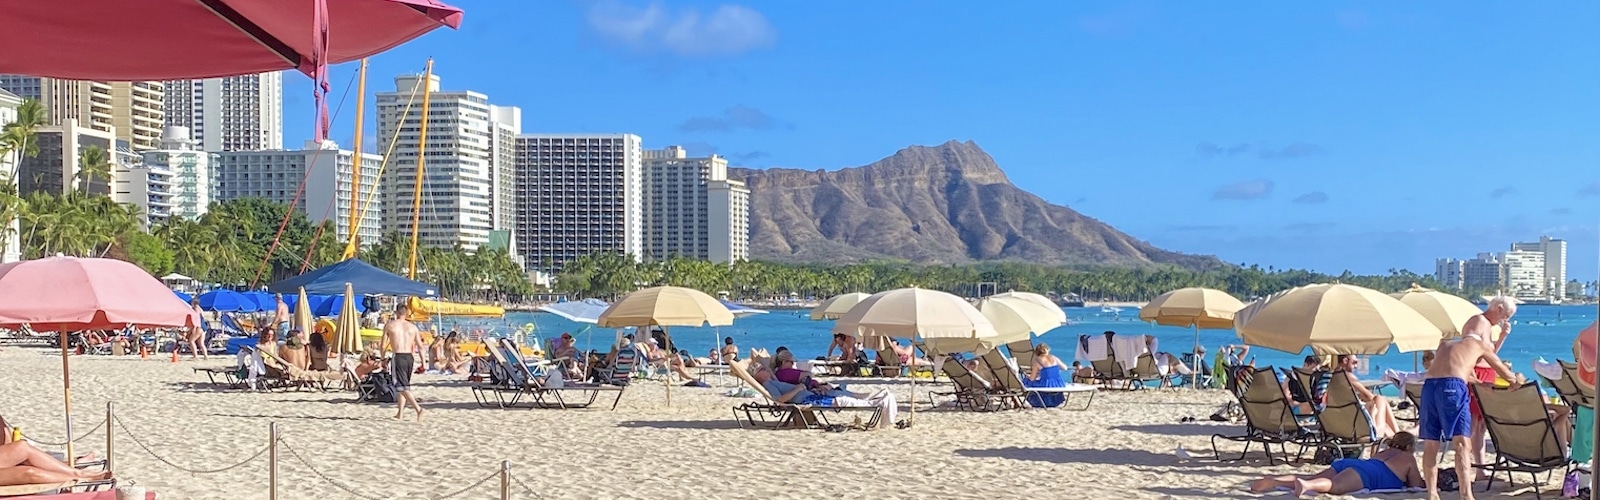 What's New on Oahu, Hawaii